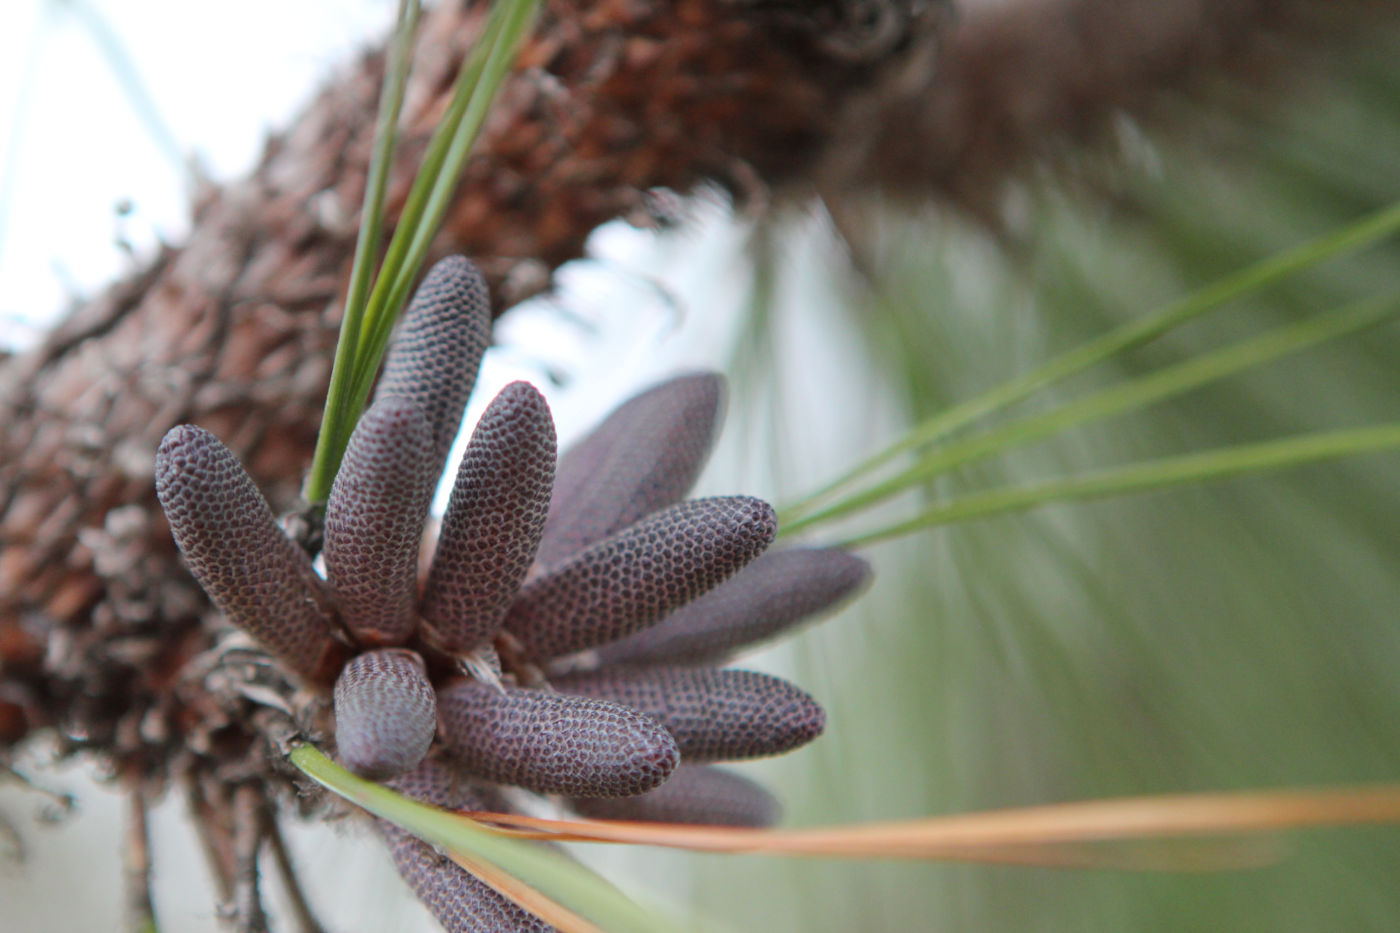 The male reproductive parts of longleaf pine.